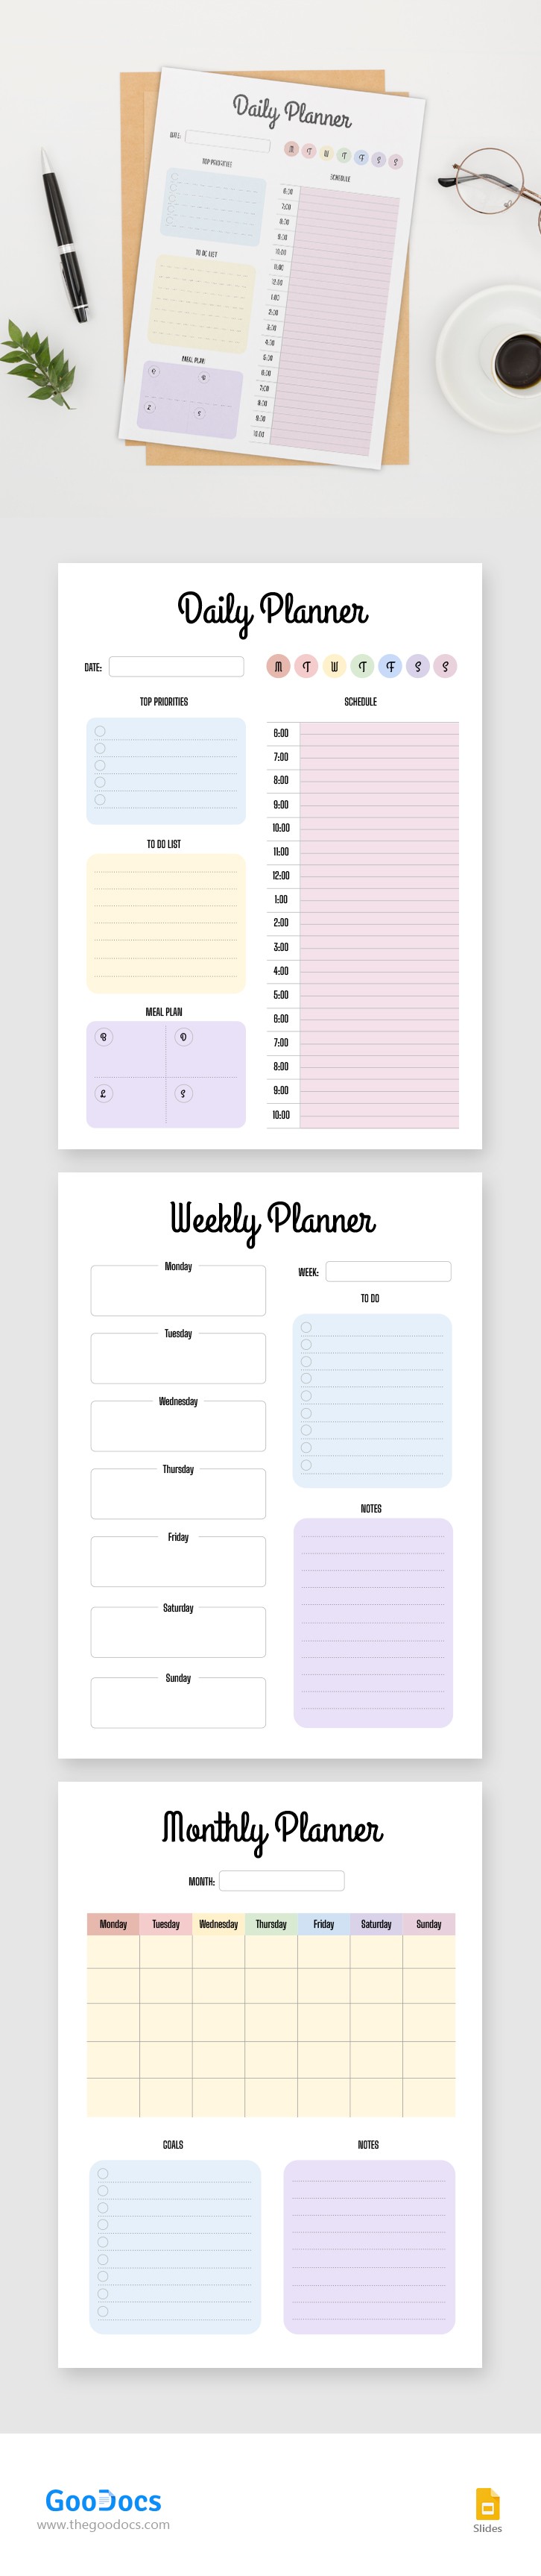 https://img.thegoodocs.com/templates/preview/family-planner-161757.jpg